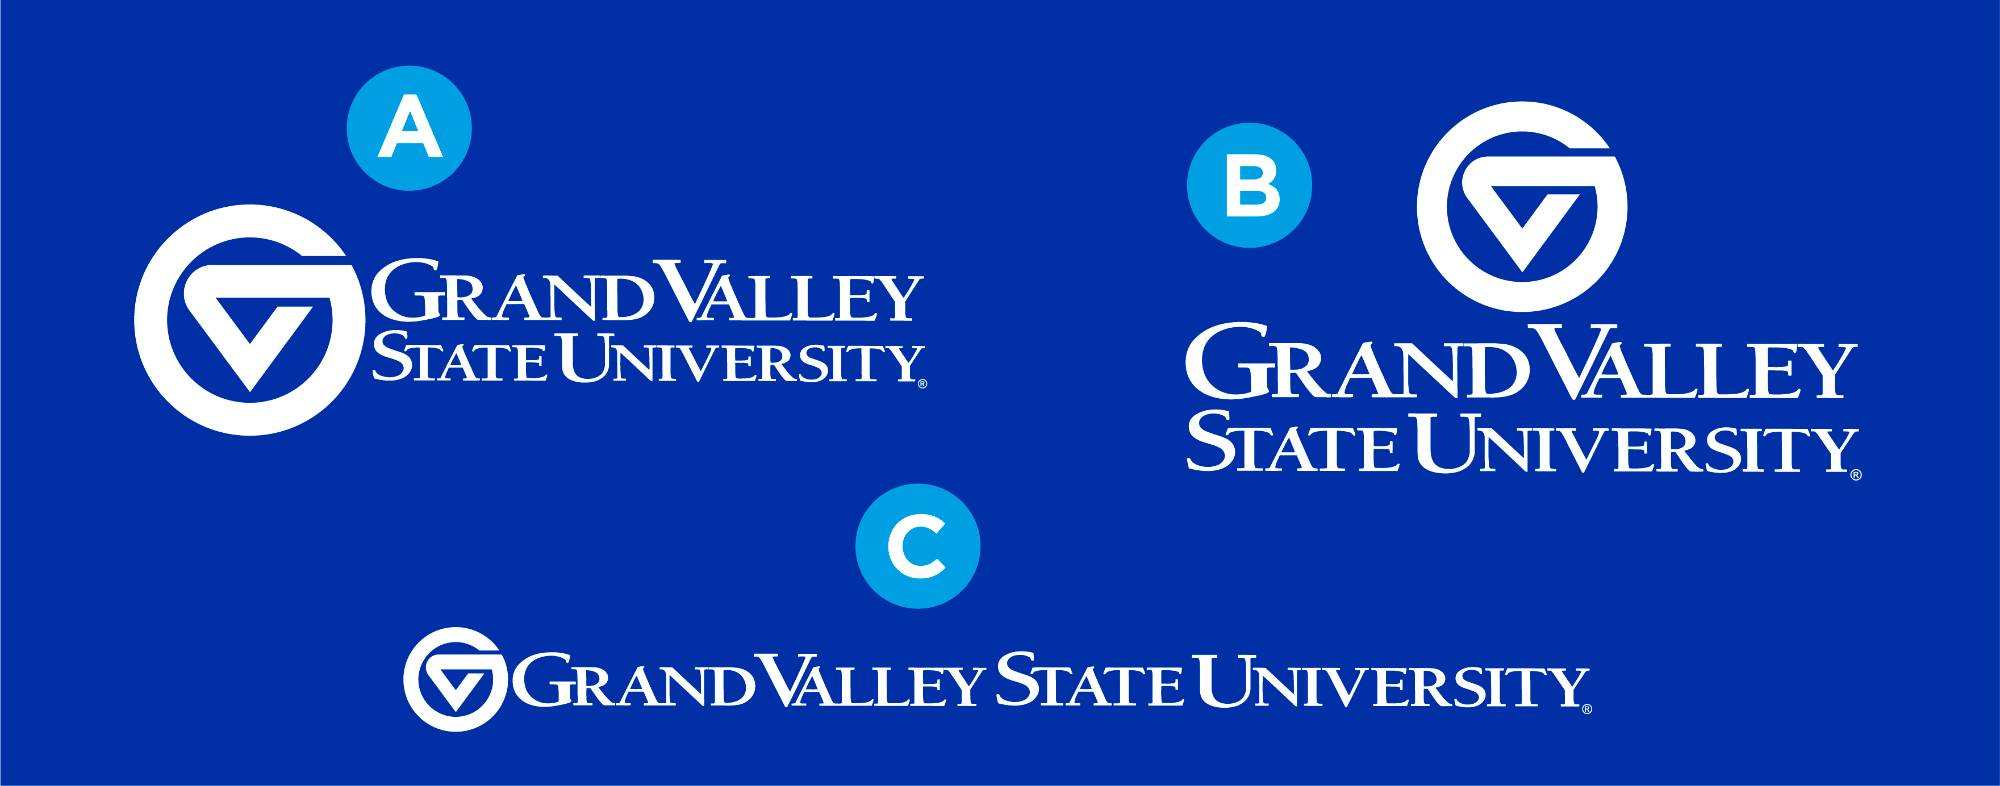 Three Grand Valley logos: one markleft, one marktop, one single-line. The letter "A" is next to the markleft logo, "B" is next to the marktop logo, and "C" is next to the single-line logo.